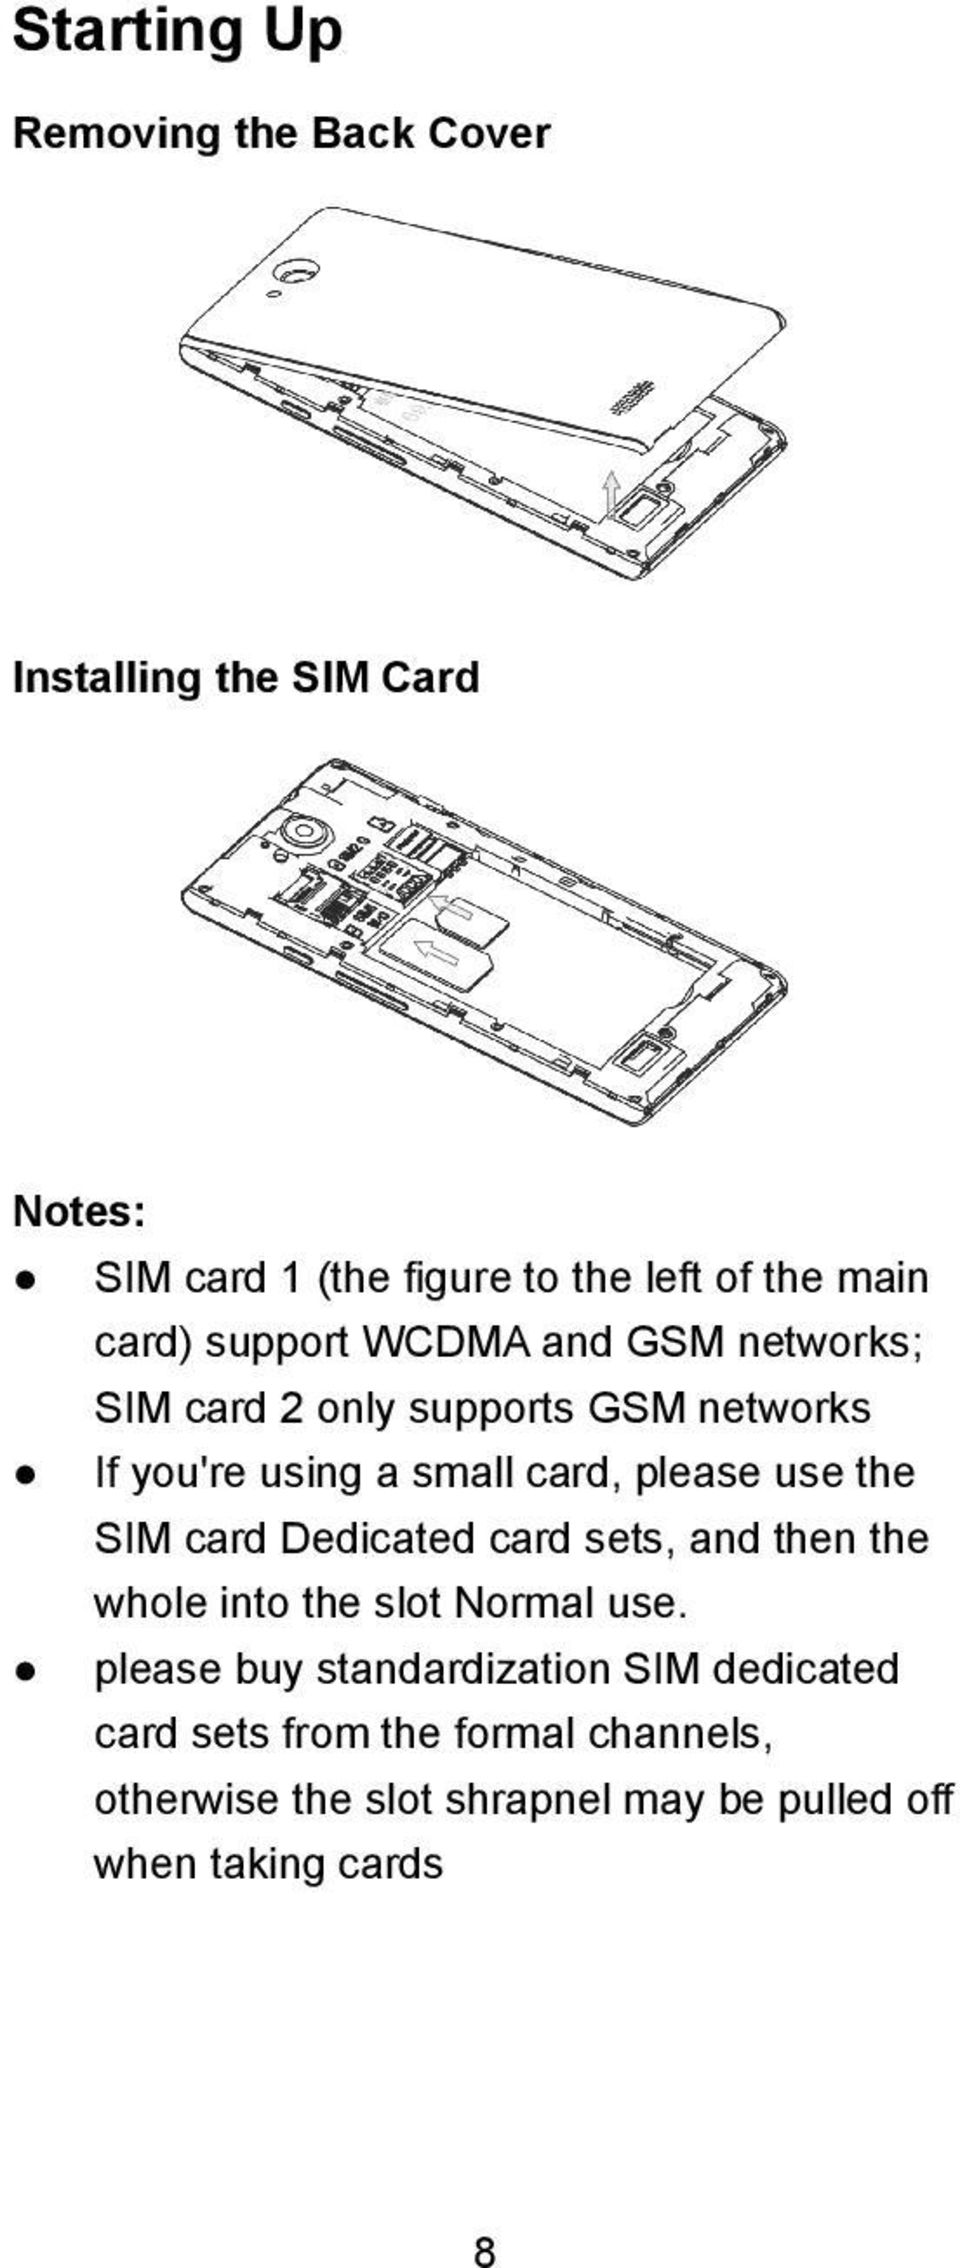 please use the SIM card Dedicated card sets, and then the whole into the slot Normal use.